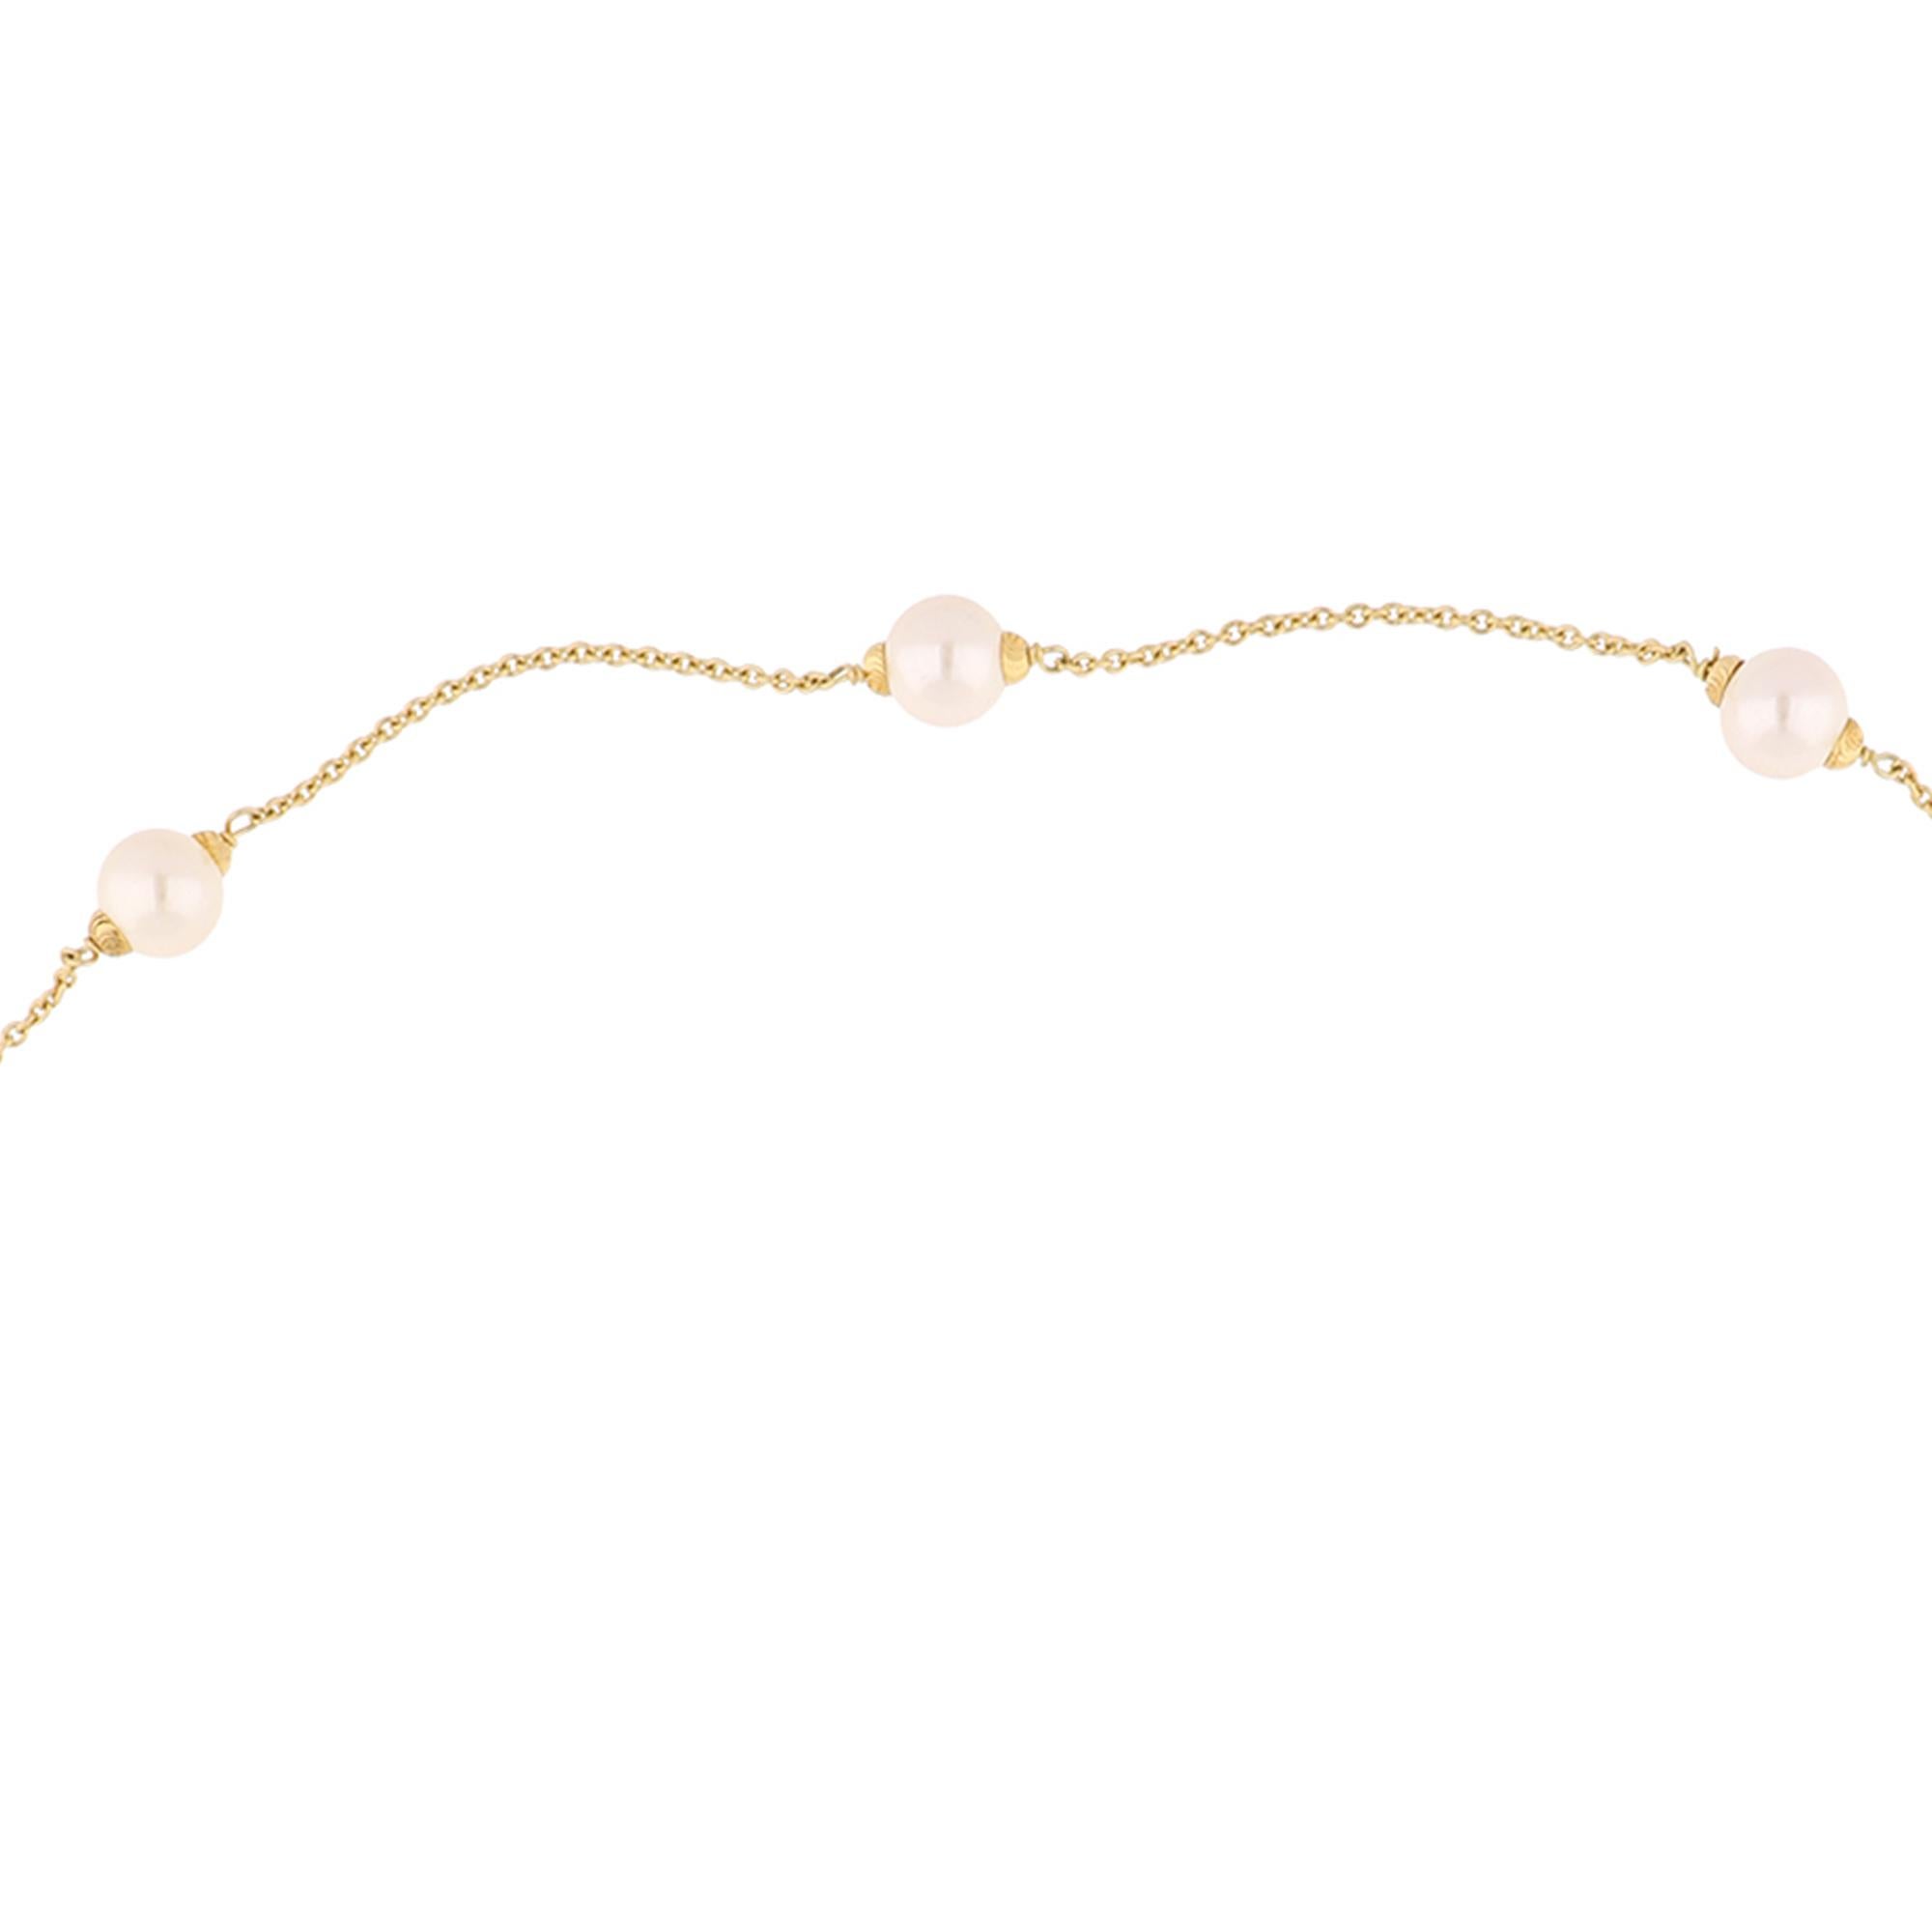 Modern 28 Carat Natural Pearl Beaded Gemstone Necklace 18 Karat Yellow Gold Jewelry For Sale